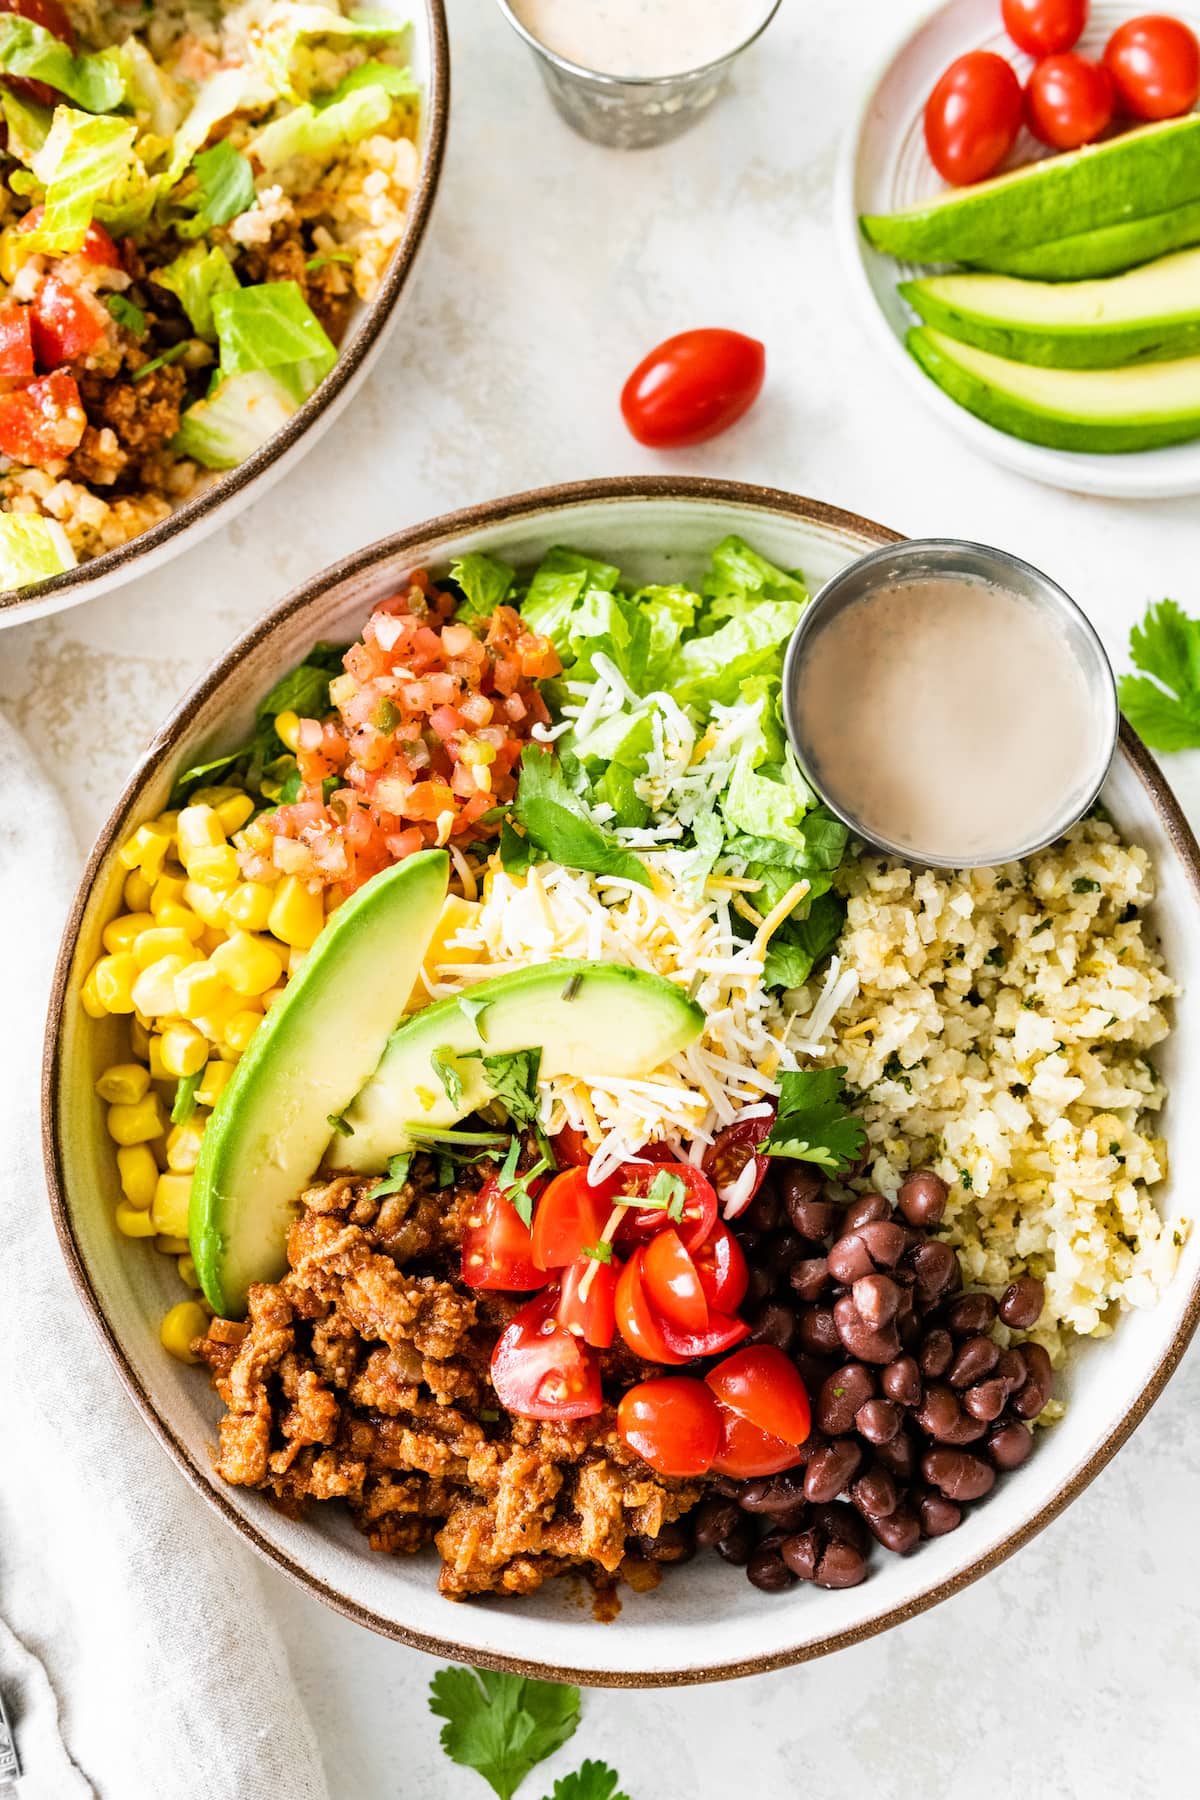 Turkey taco bowl served in a white serving bowl, topped with avocado, cheese and served with a side of dressing.